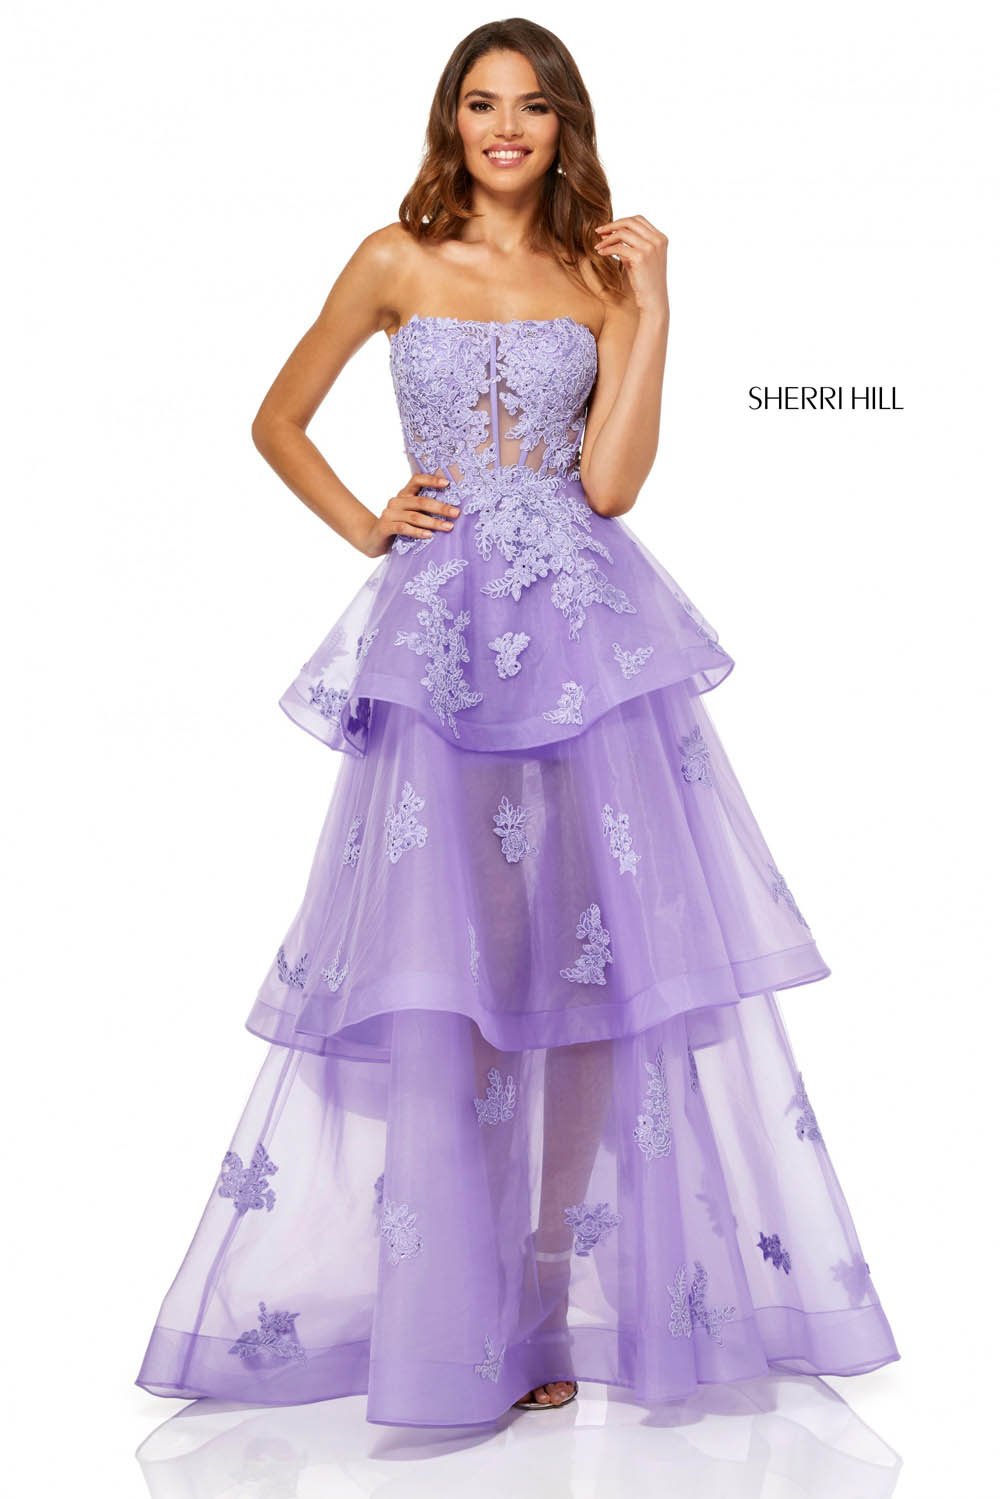 Sherri Hill 52494 dress images in these colors: Lilac, Ivory.